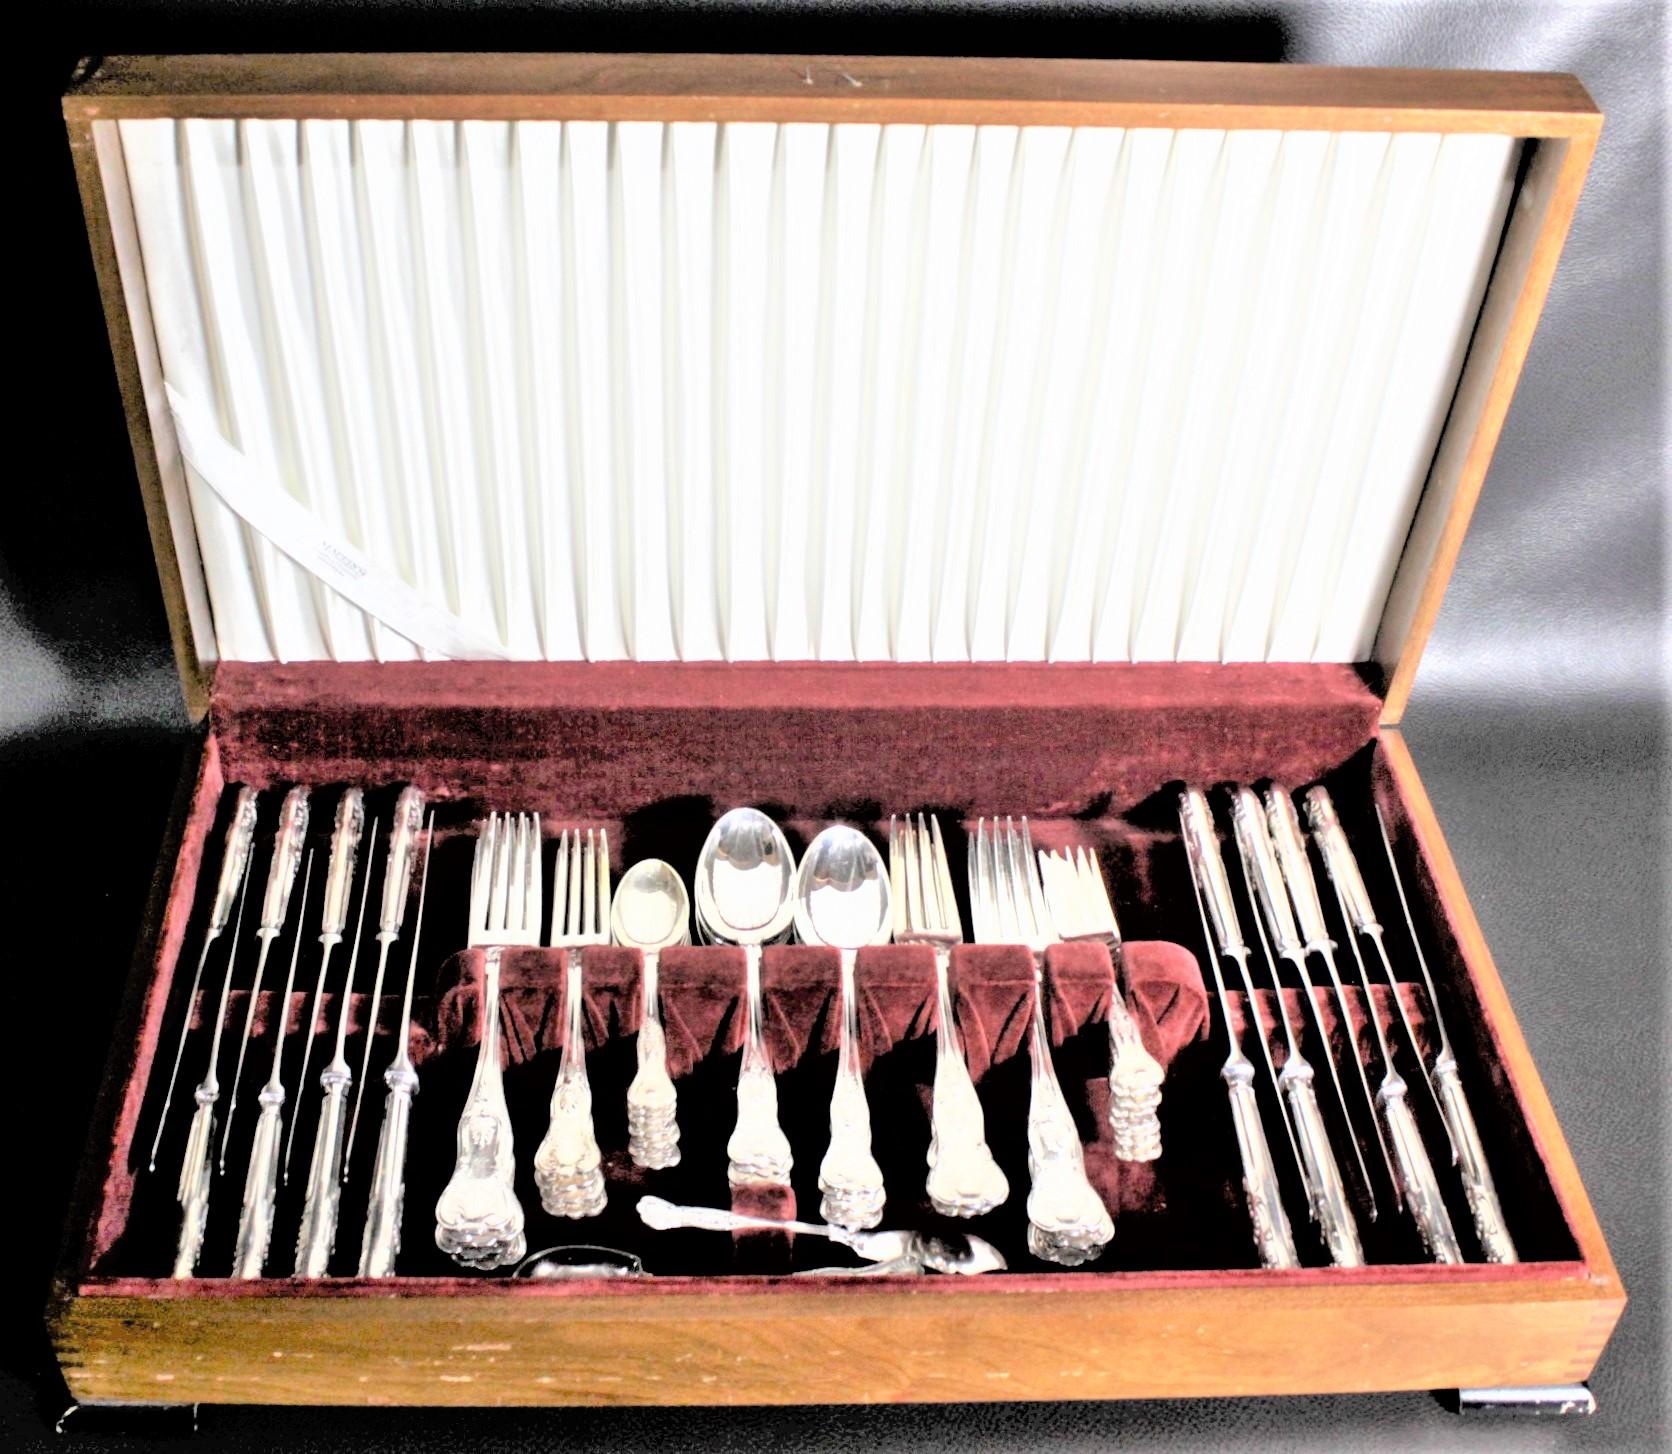 This silver plated flatware set was made by the renowned Mappin & Webb Company of England in approximately 1960 in their 'Kings Pattern'. This is a partial set for eight missing one coffee spoon but consists of dinner and luncheon knives, forks, and